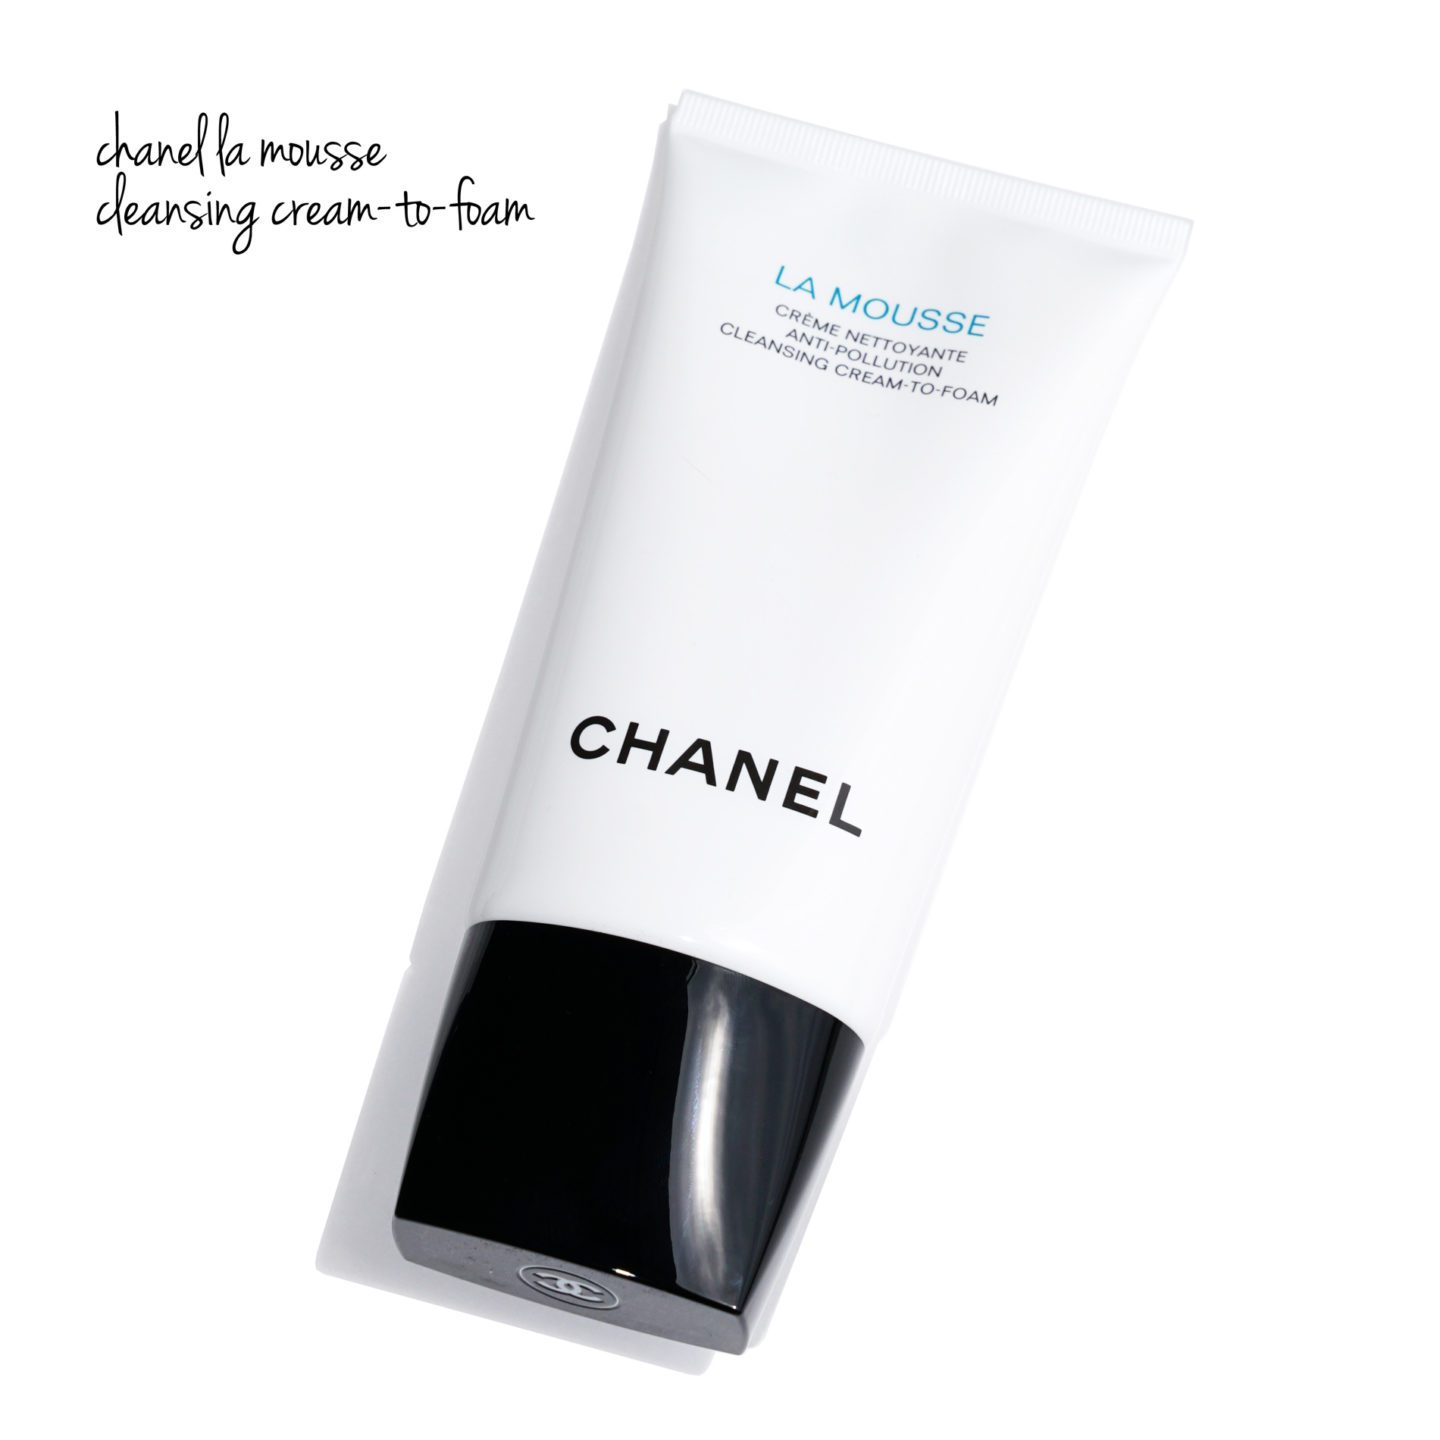 Chanel La Mousse Cleansing Cream-To-Foam Cleanser Review